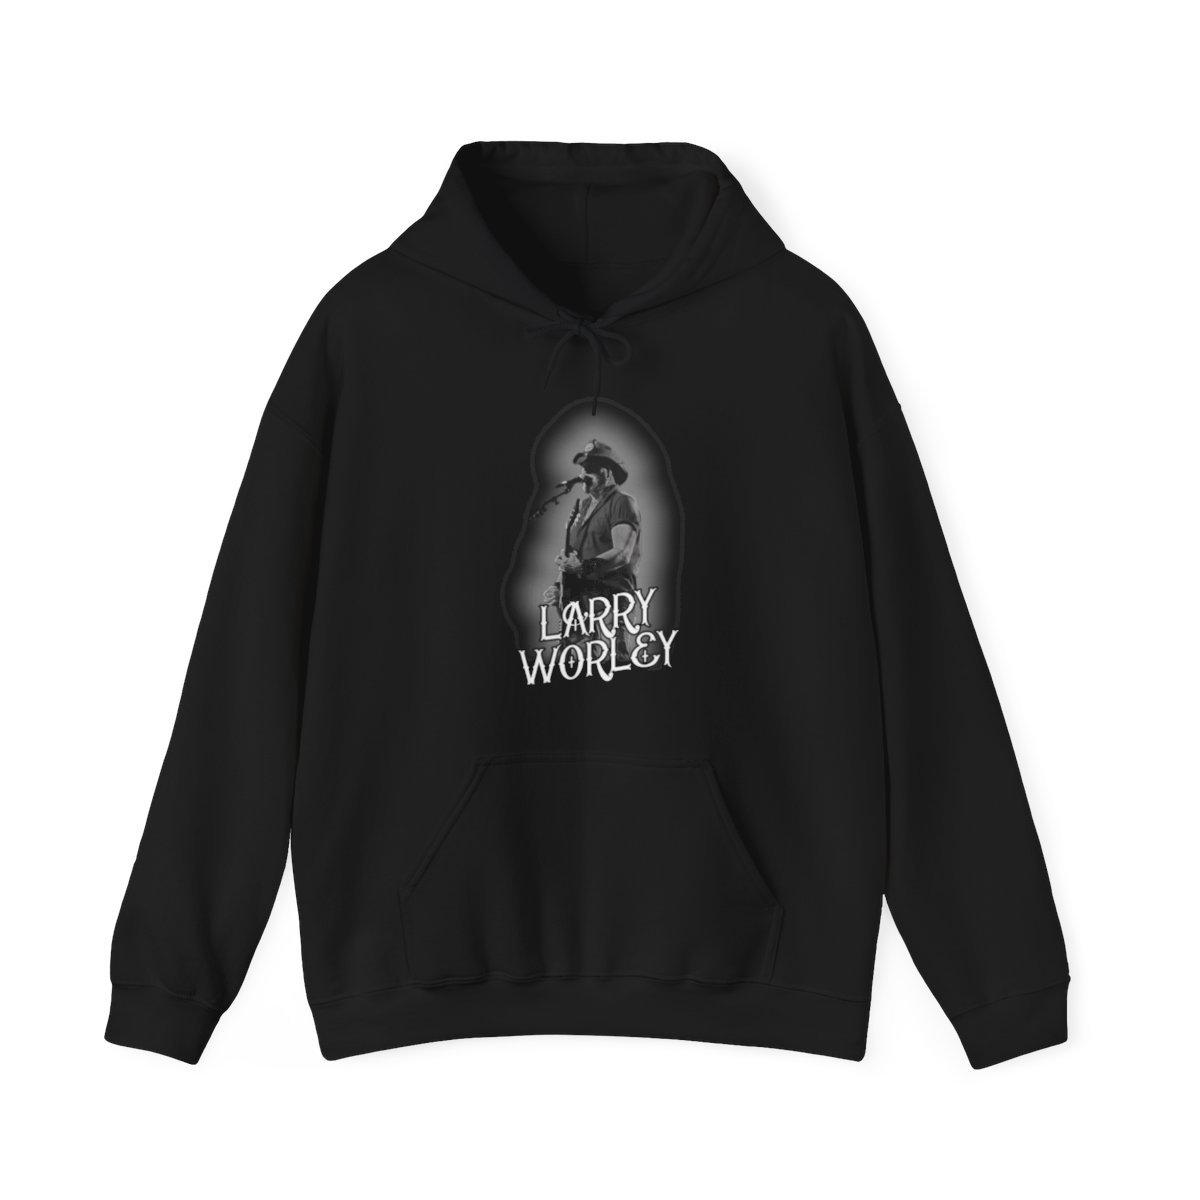 Larry Worley Pullover Hooded Sweatshirt 18500D 2 Sided